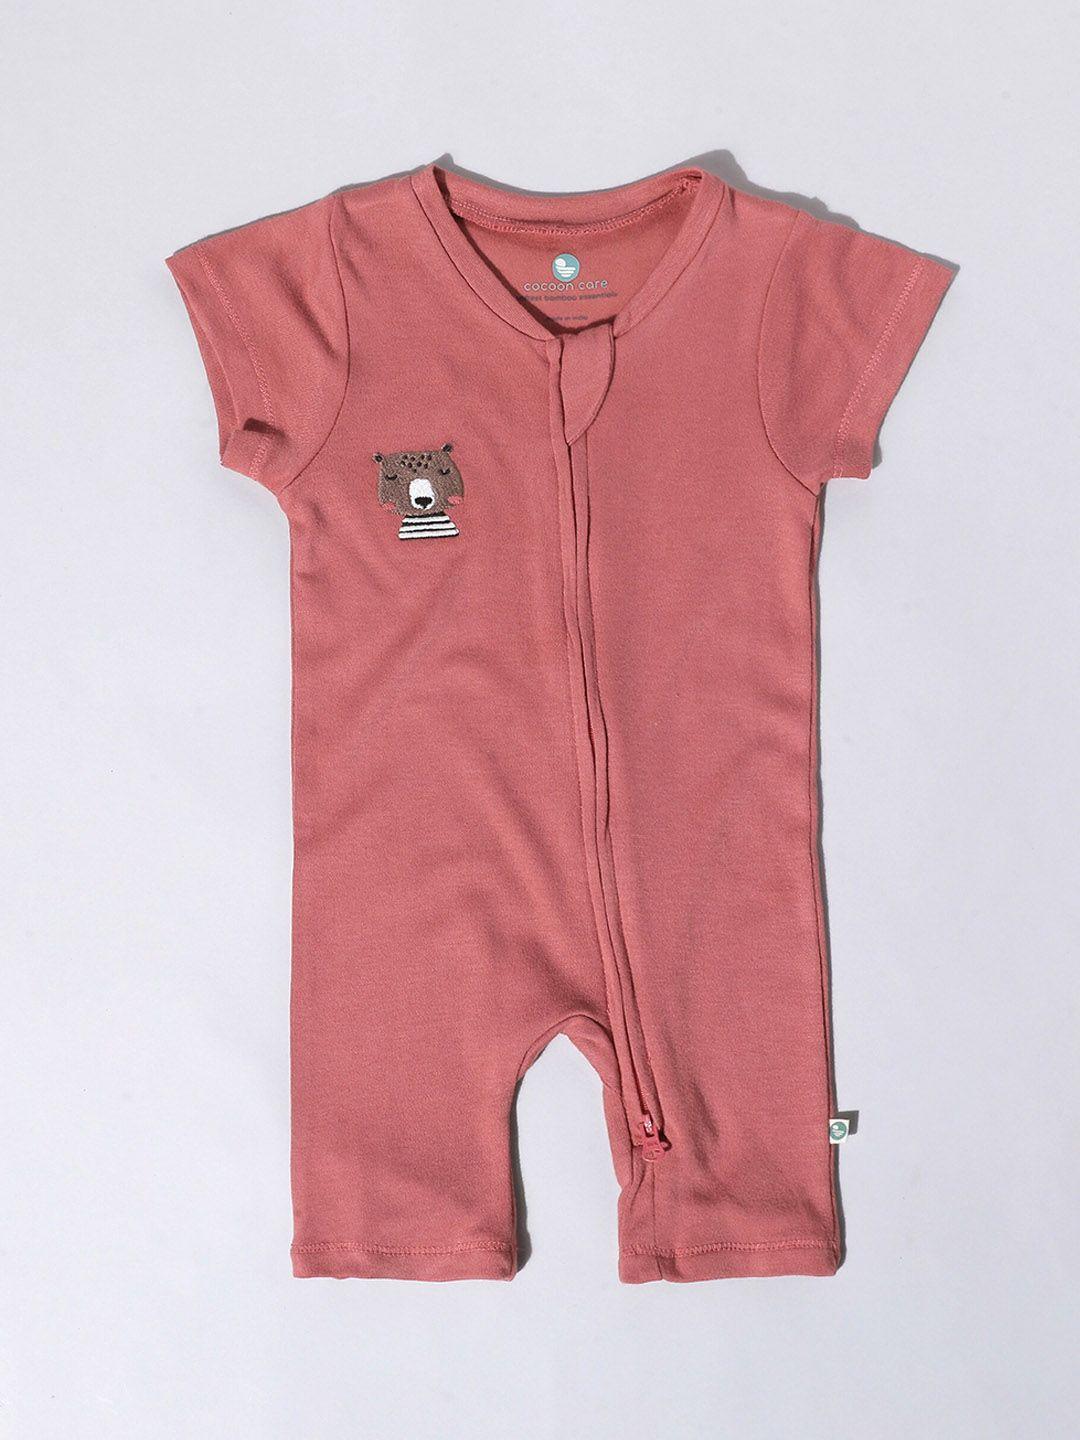 cocoon-care-unisex-kids-brick-red-rompers-with-front-open-zipper